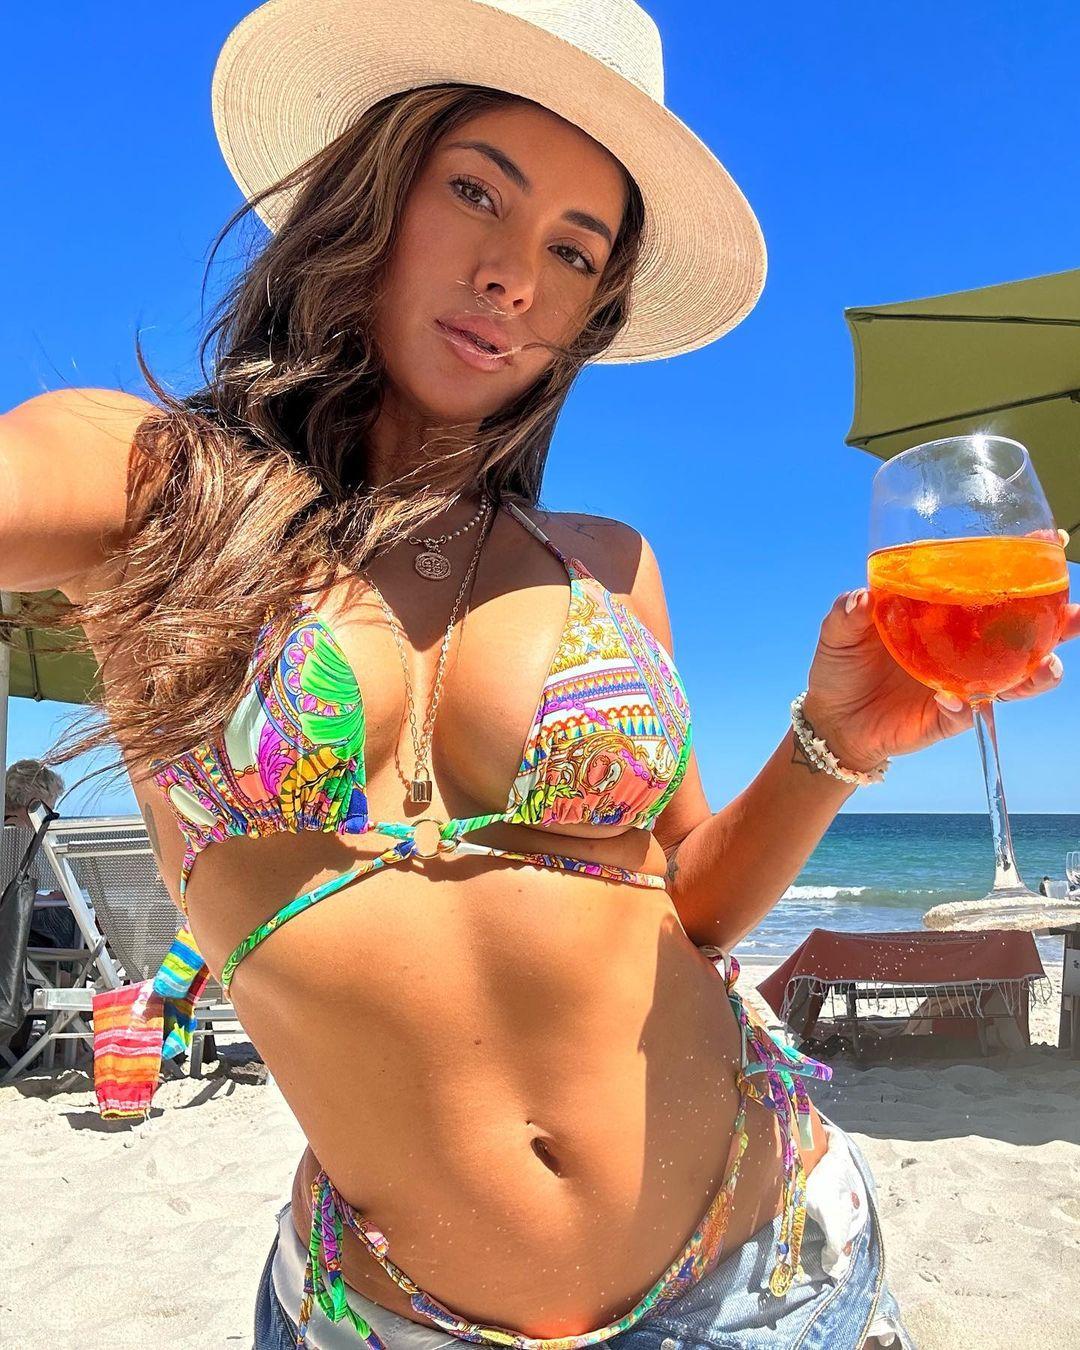 Arianny Celeste’s Chest Pops Out Of Bikini While In Mexico